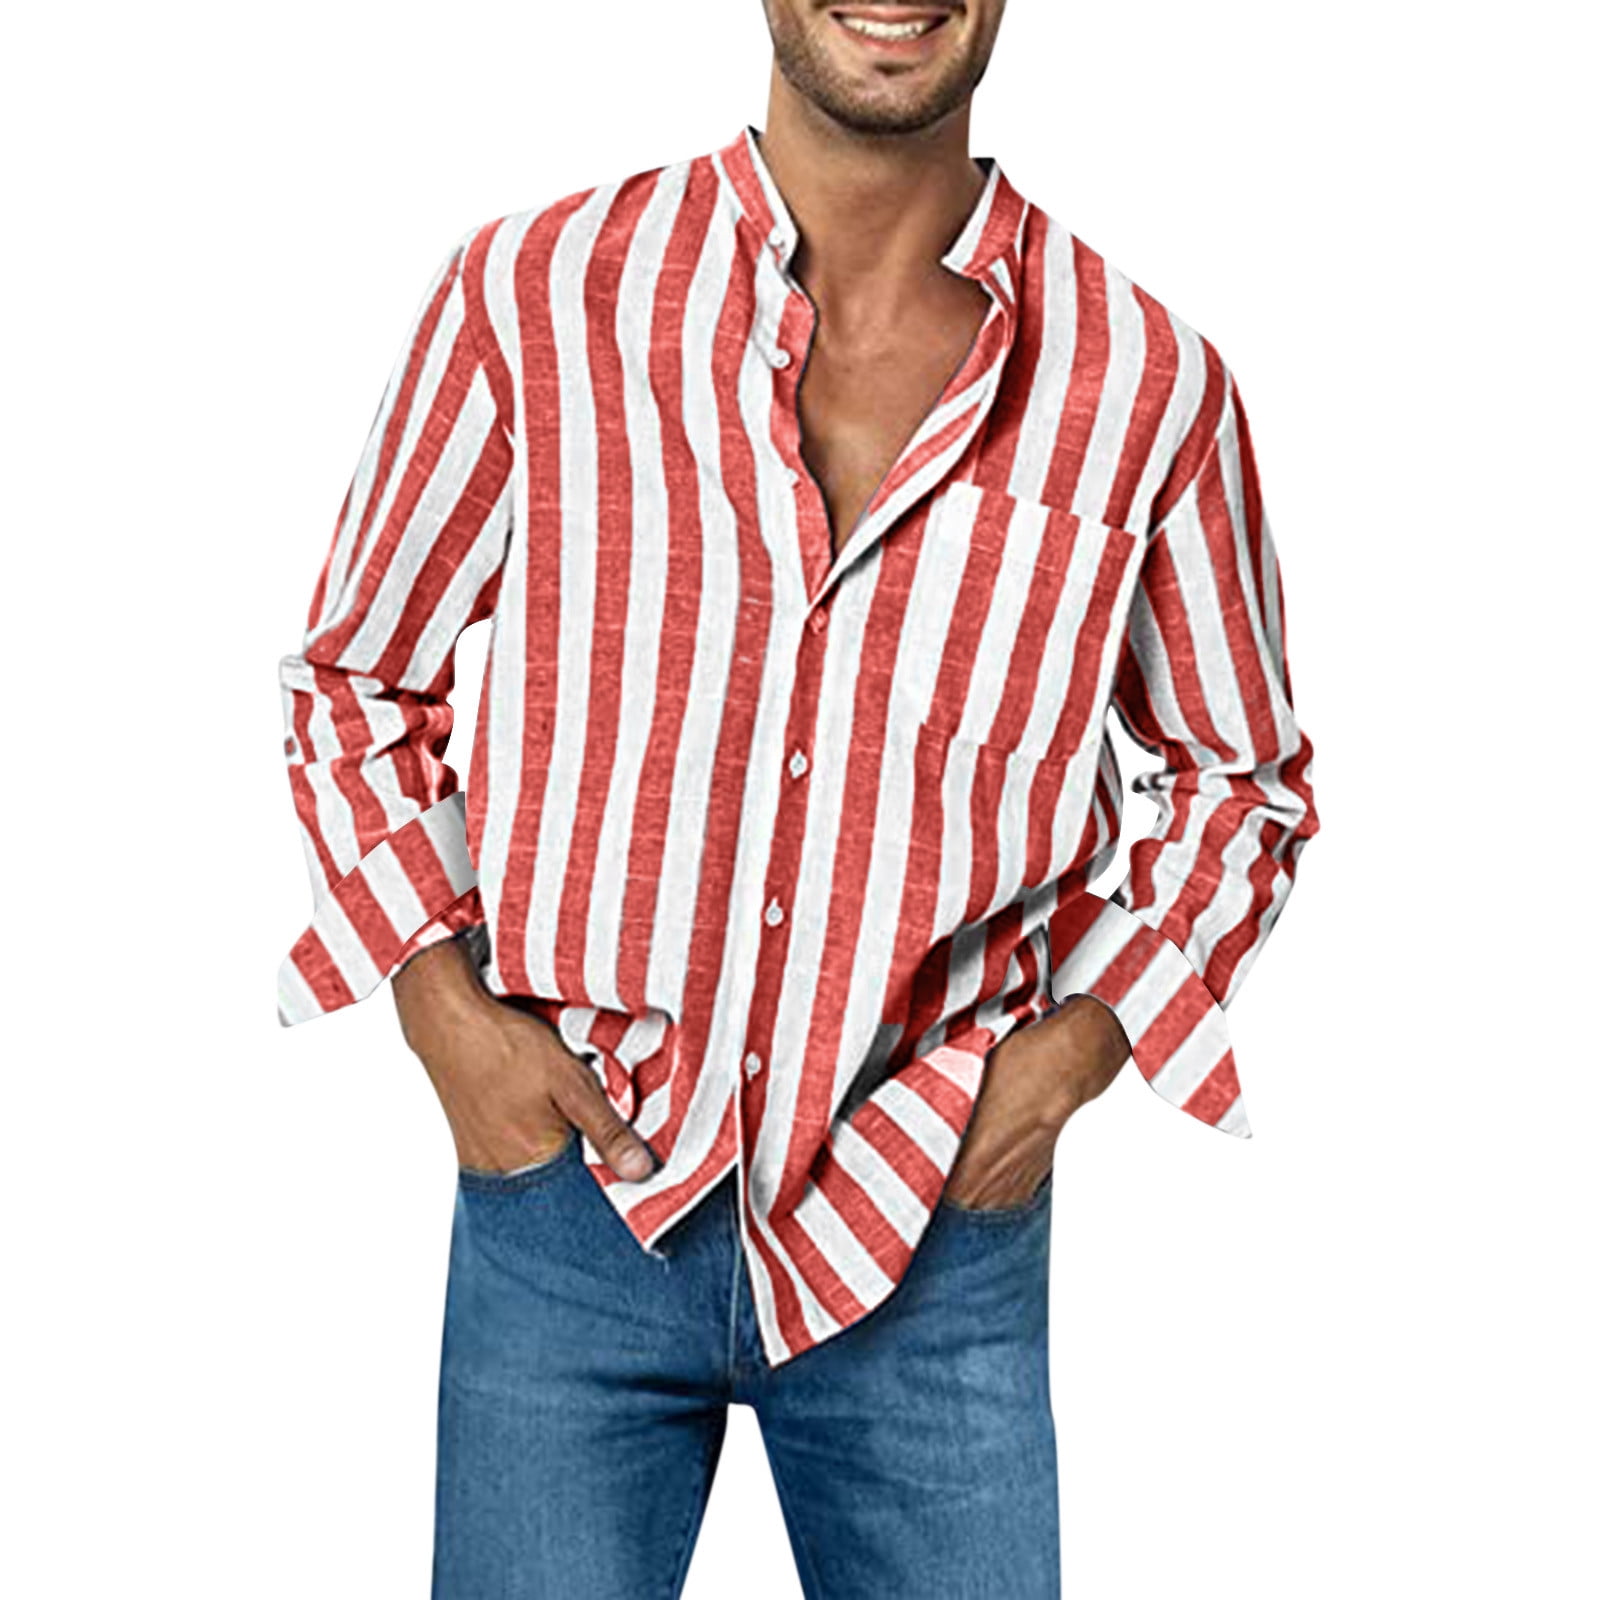 White T Shirts for Men Striped Print Long Sleeve Button-Down Shirts Red ...